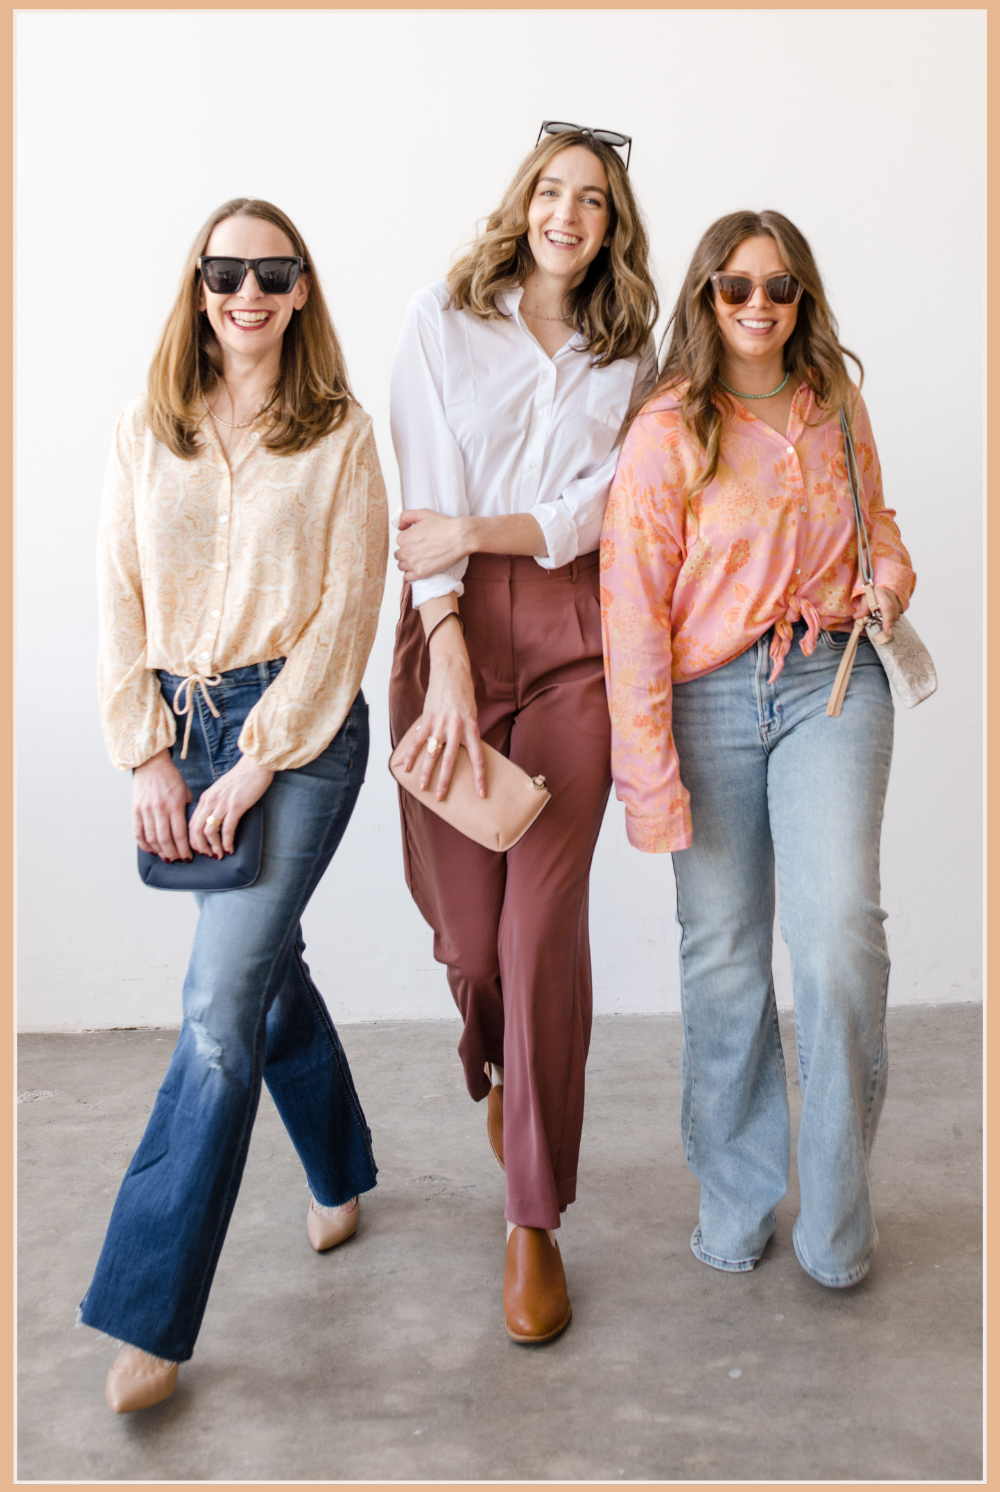 Women's Apparel | Three Girls wearing jeans and different blouses | Seattle, WA | Vixen Collection